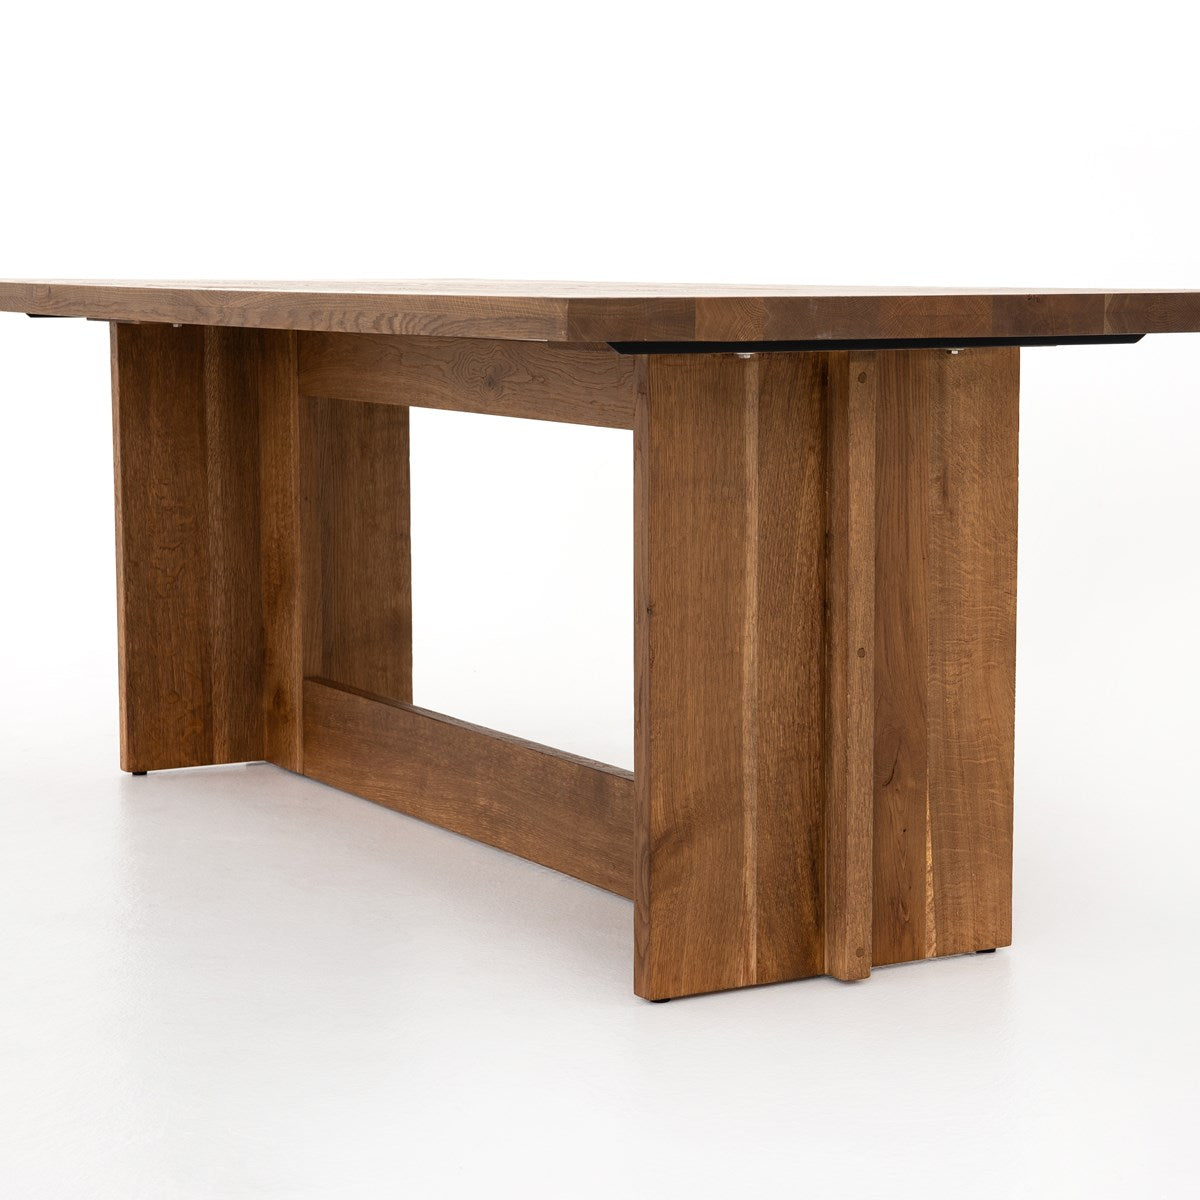 Erie Dining Table Dining Table Four Hands     Four Hands, Burke Decor, Mid Century Modern Furniture, Old Bones Furniture Company, Old Bones Co, Modern Mid Century, Designer Furniture, https://www.oldbonesco.com/